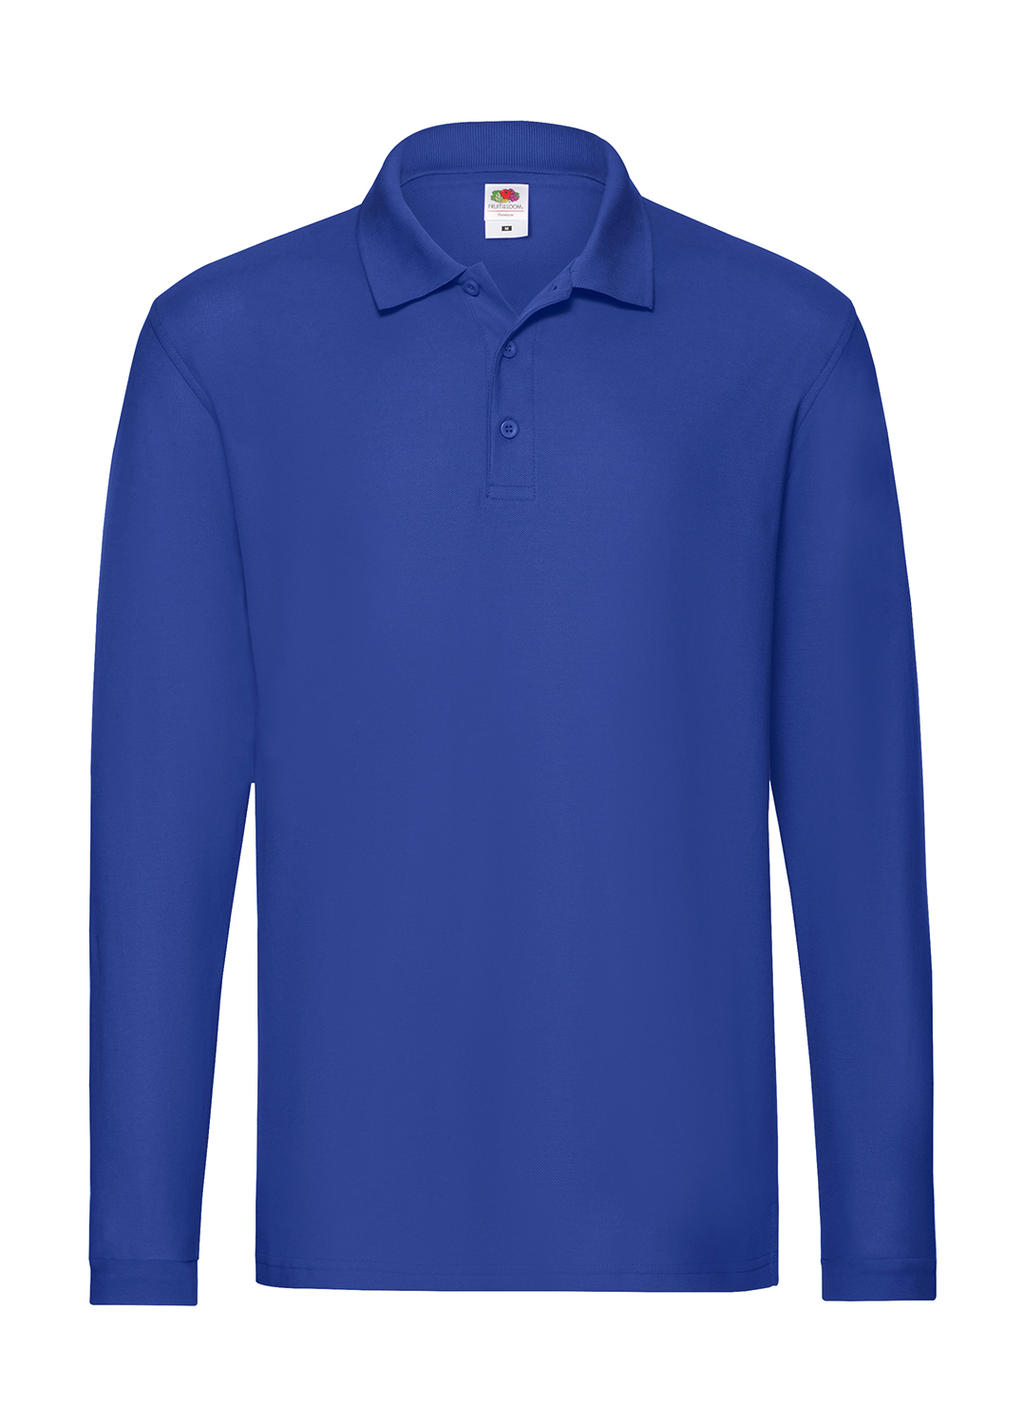  Premium Long Sleeve Polo in Farbe Royal